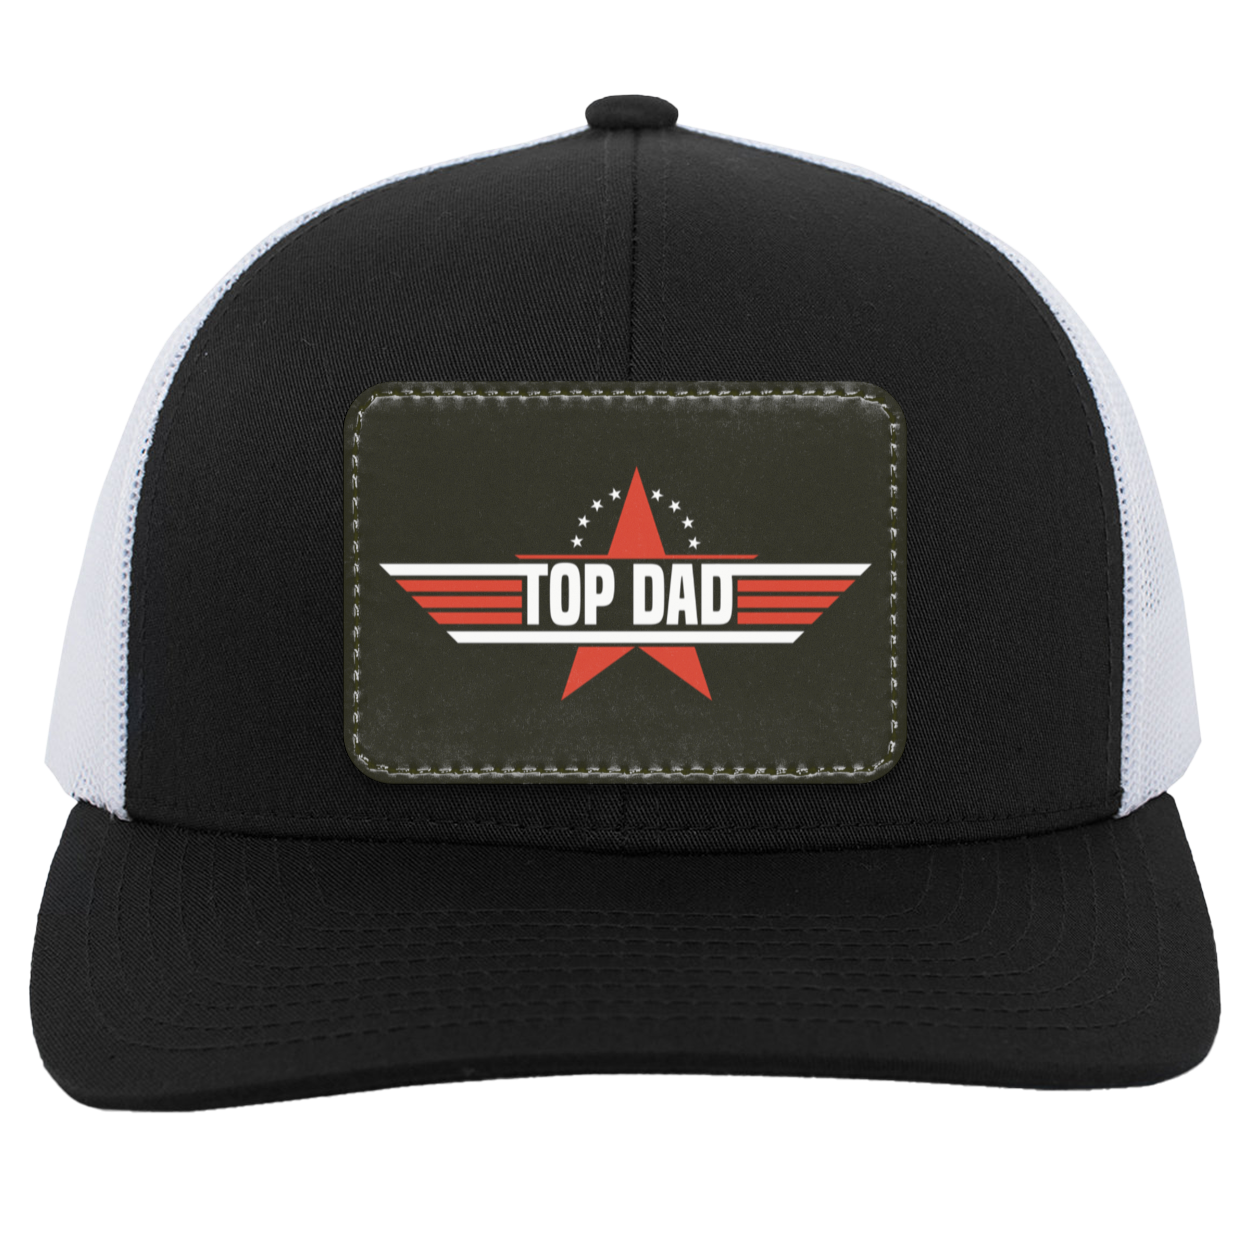 Red Top Dad Trucker Snap Back